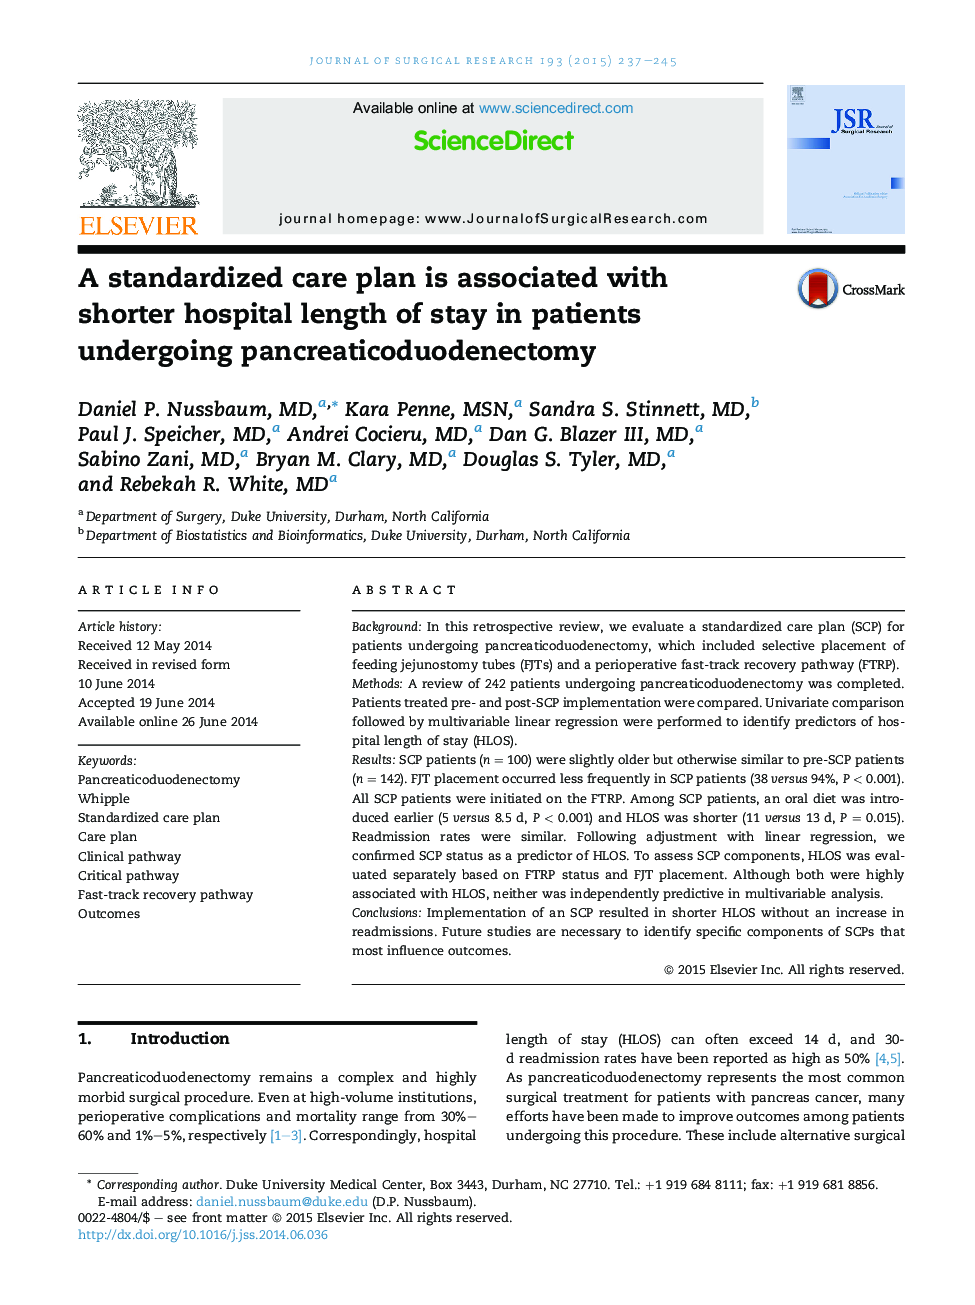 Oncology/EndocrineA standardized care plan is associated with shorter hospital length of stay in patients undergoing pancreaticoduodenectomy